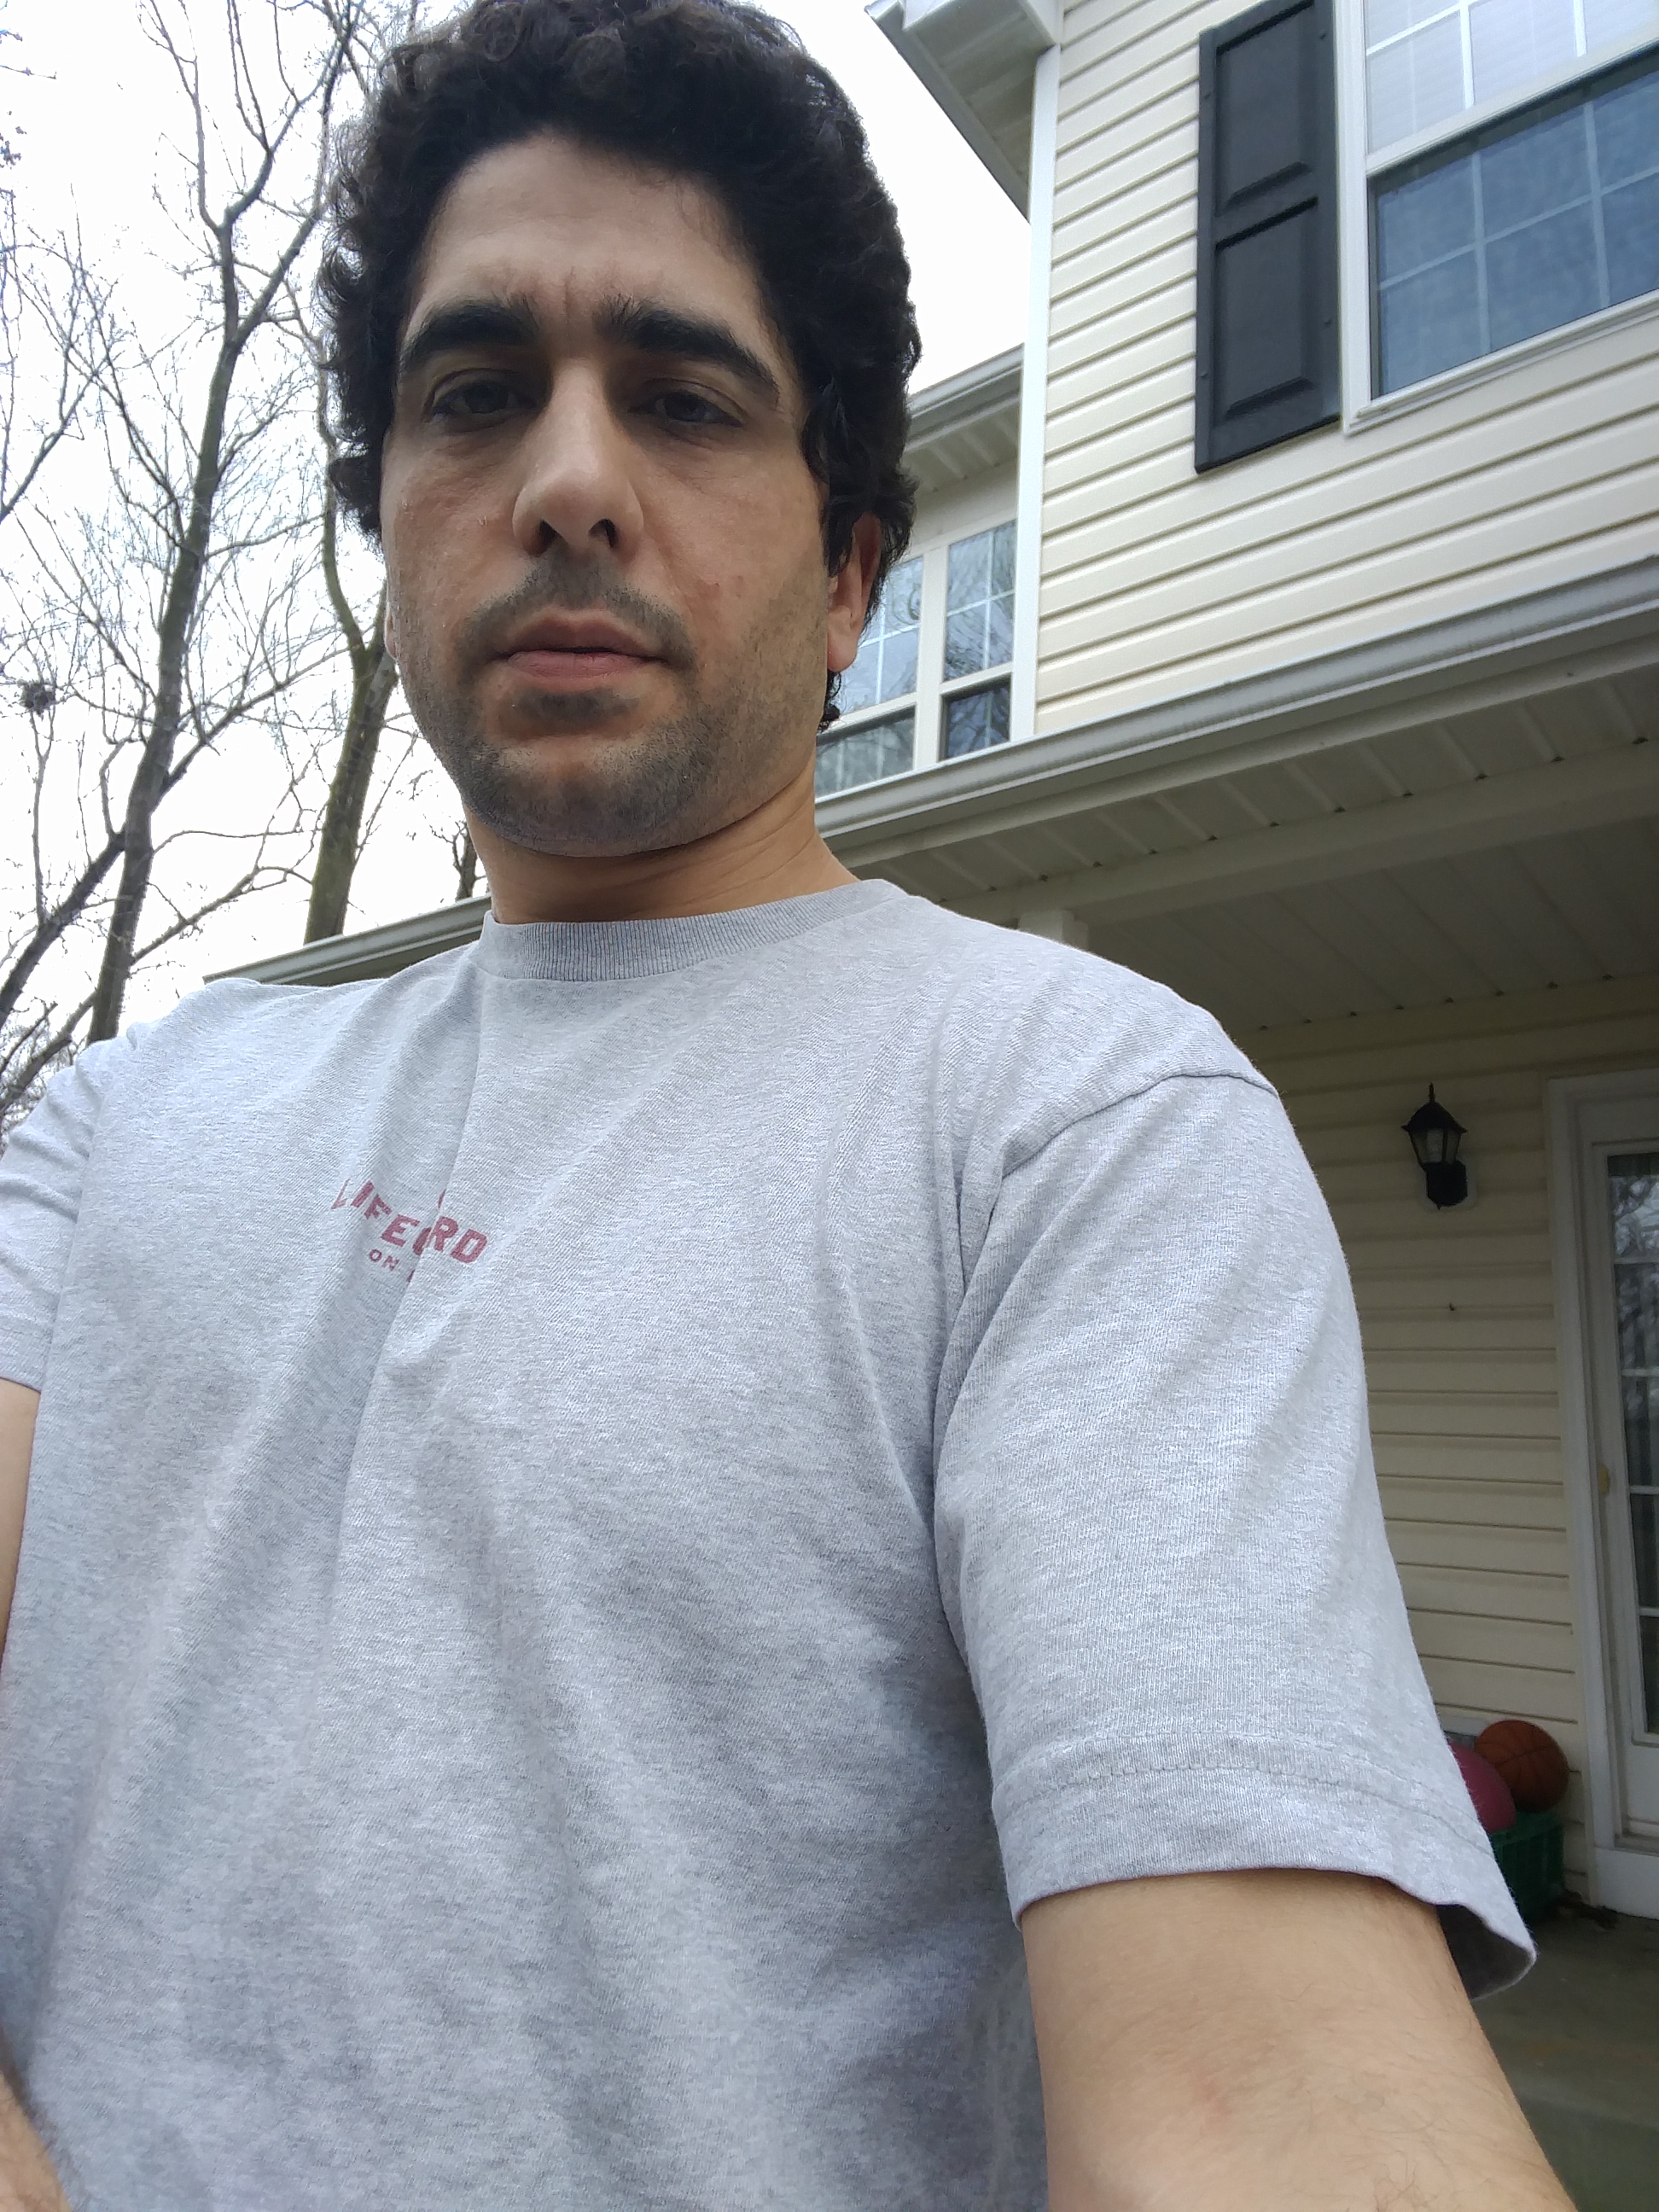 Out in a T-shirt on Christmas Eve in MD